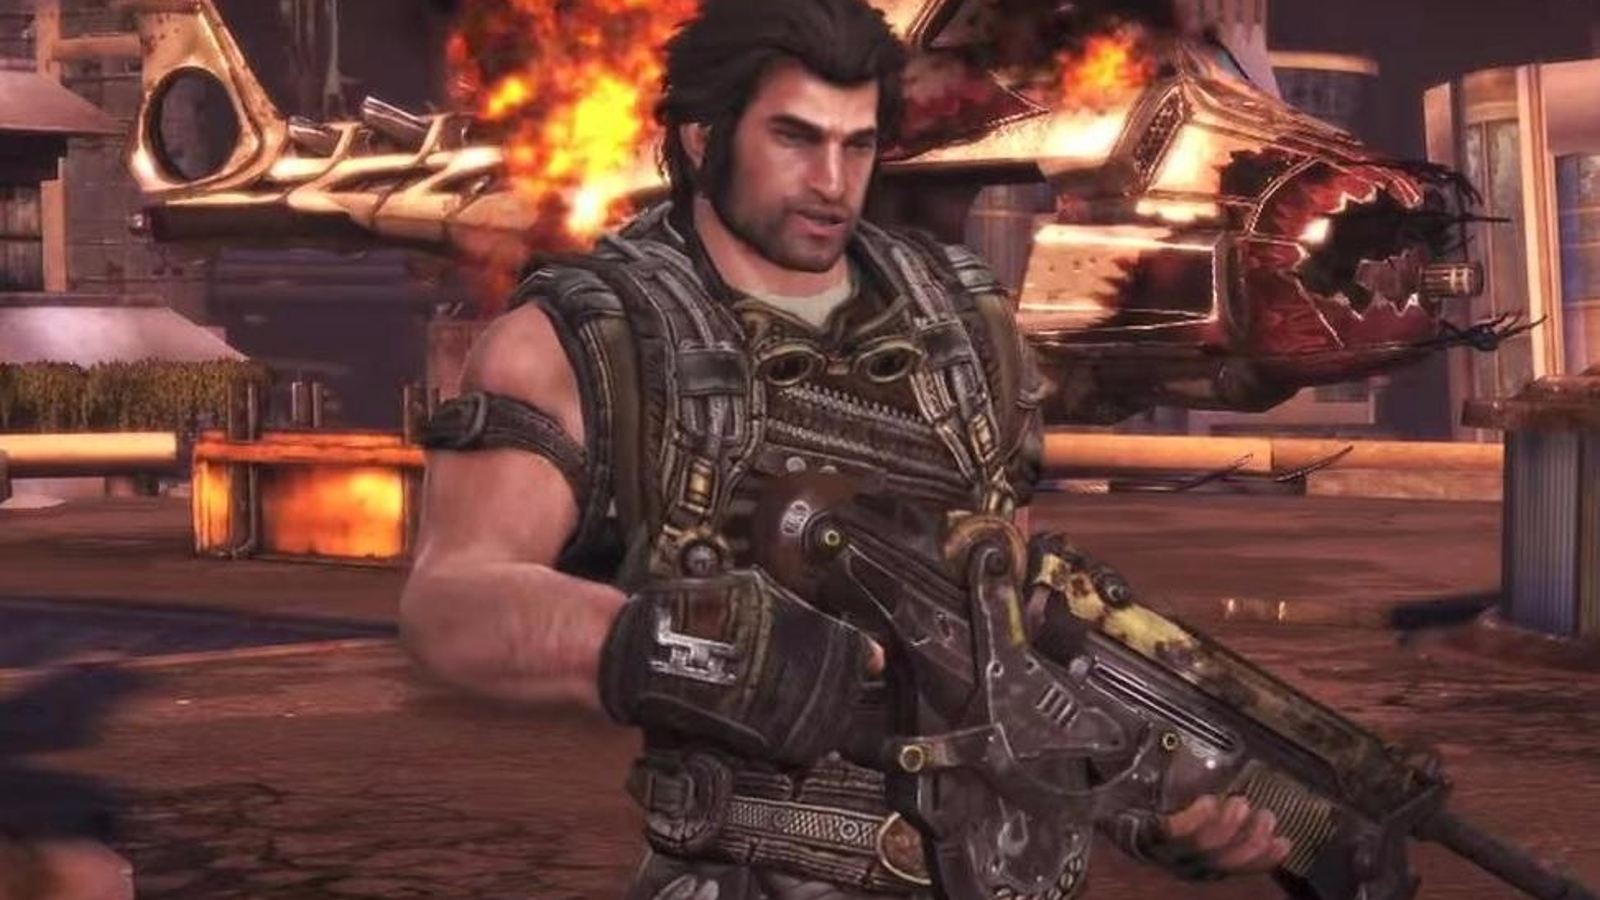 Watch: Bulletstorm Full Clip Edition and the five dickest moves by game heroes | Eurogamer.net